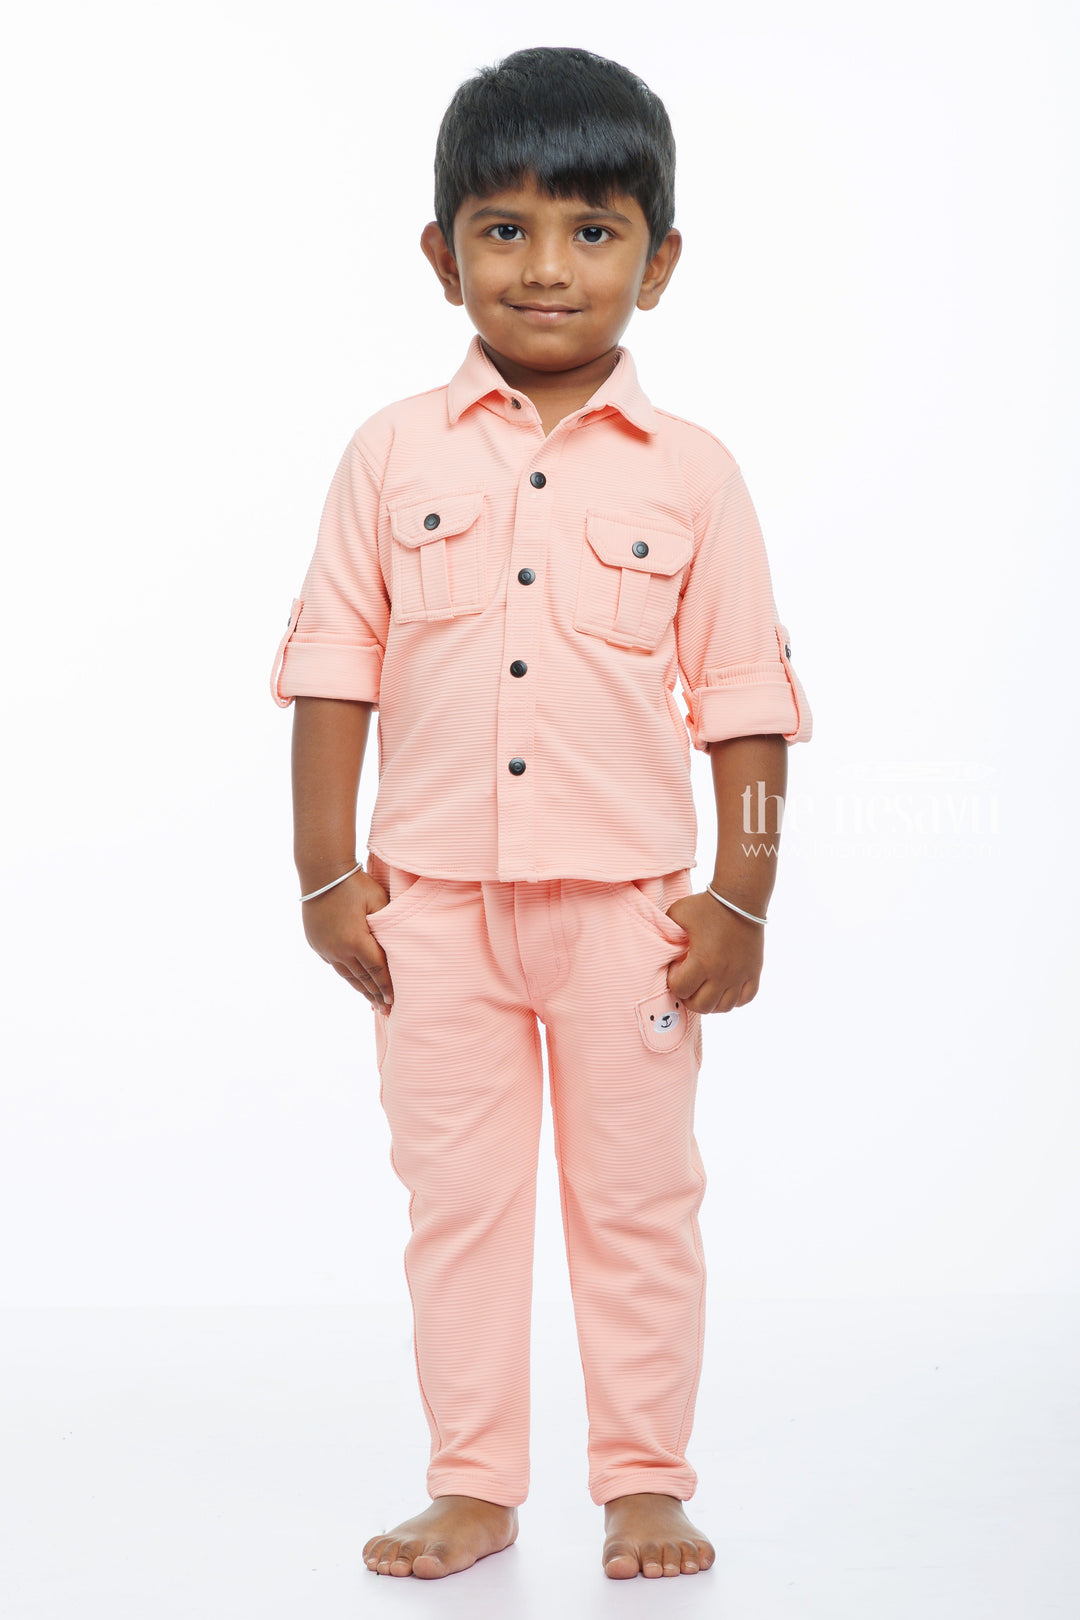 The Nesavu Boys Casual Set Boys Pastel Pink Shirt and Pant Set - Trendy and Comfortable Nesavu 14 (6M) / Pink / Knitted Lycra BES528C-14 Boys Chic Pastel Pink Casual Set | Ideal for Stylish Comfort | The Nesavu